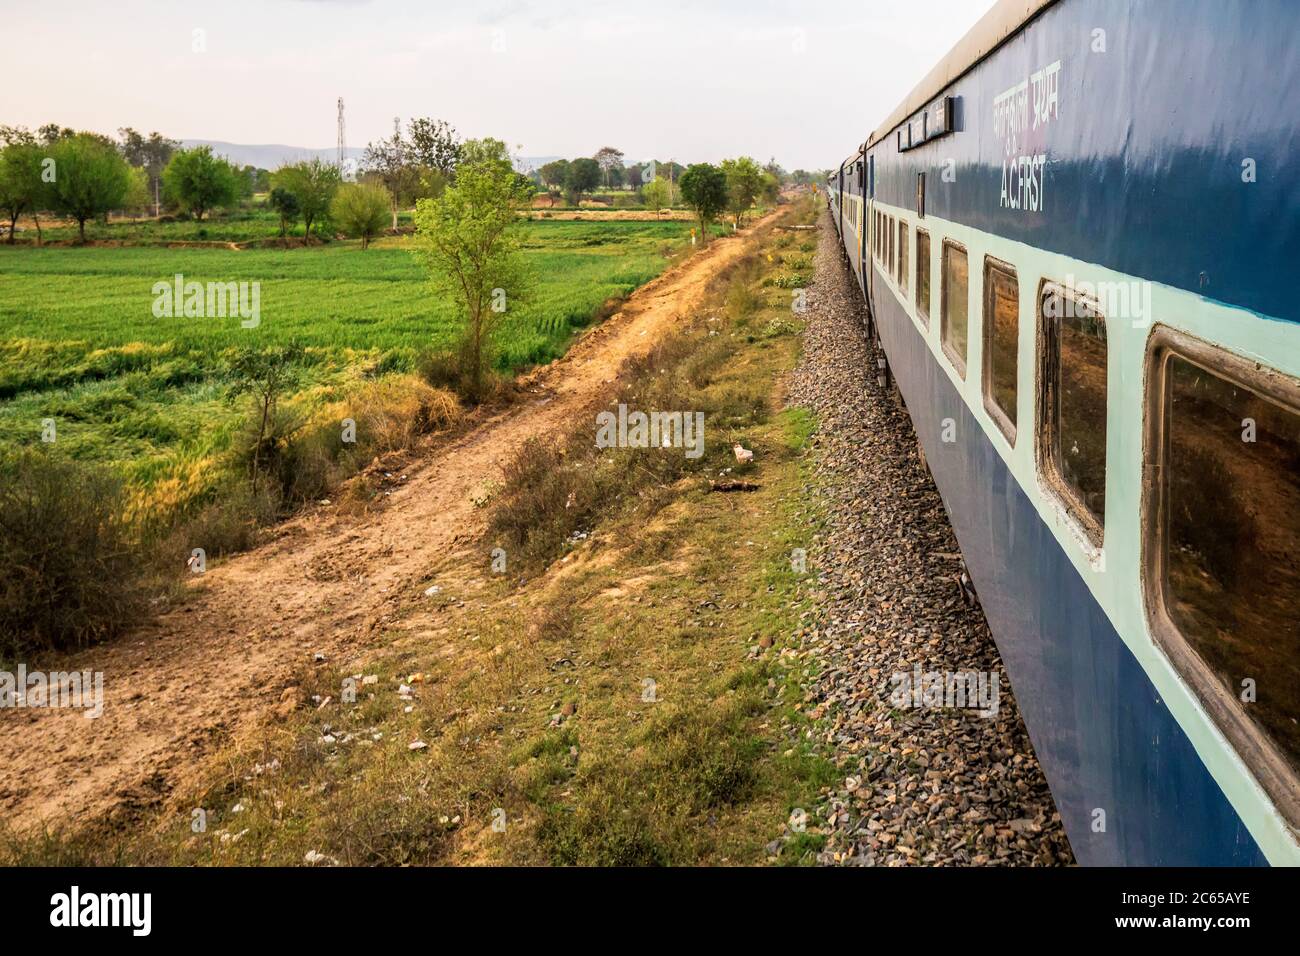 Indian train second class coach show while moving, india. Stock Photo